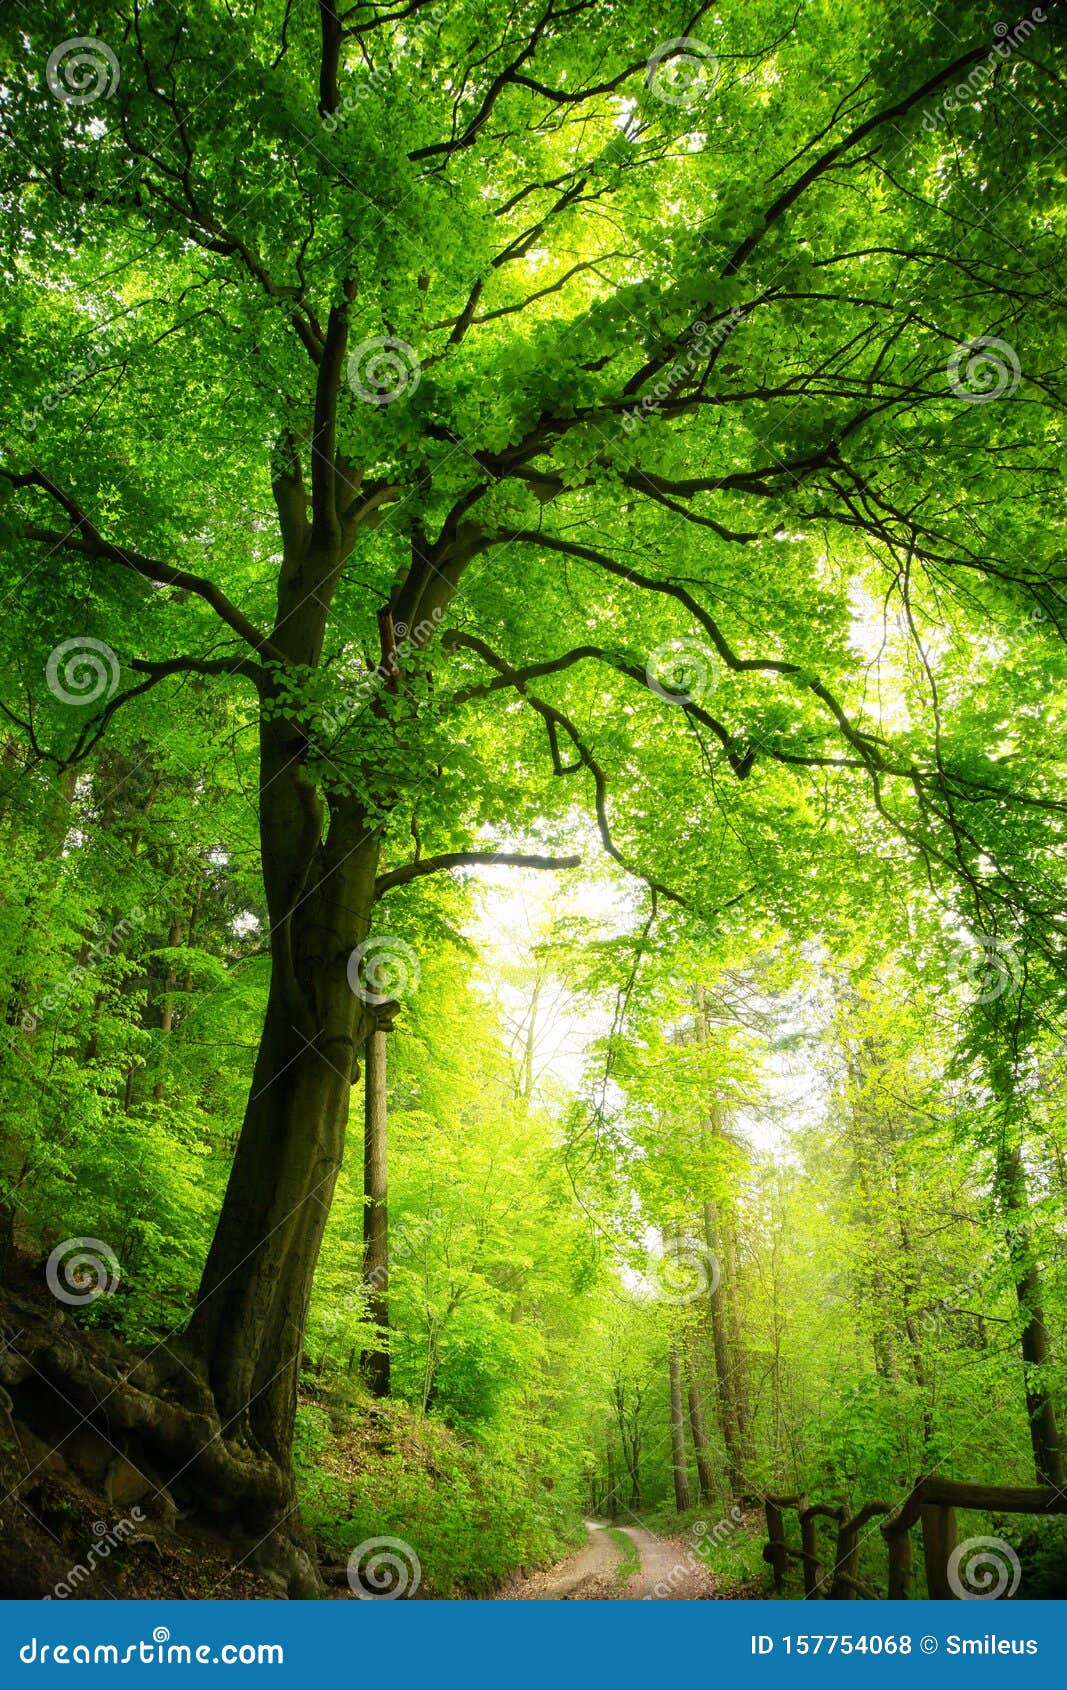 Majestic Tree in Green Forest Stock Photo - Image of overcast, nature